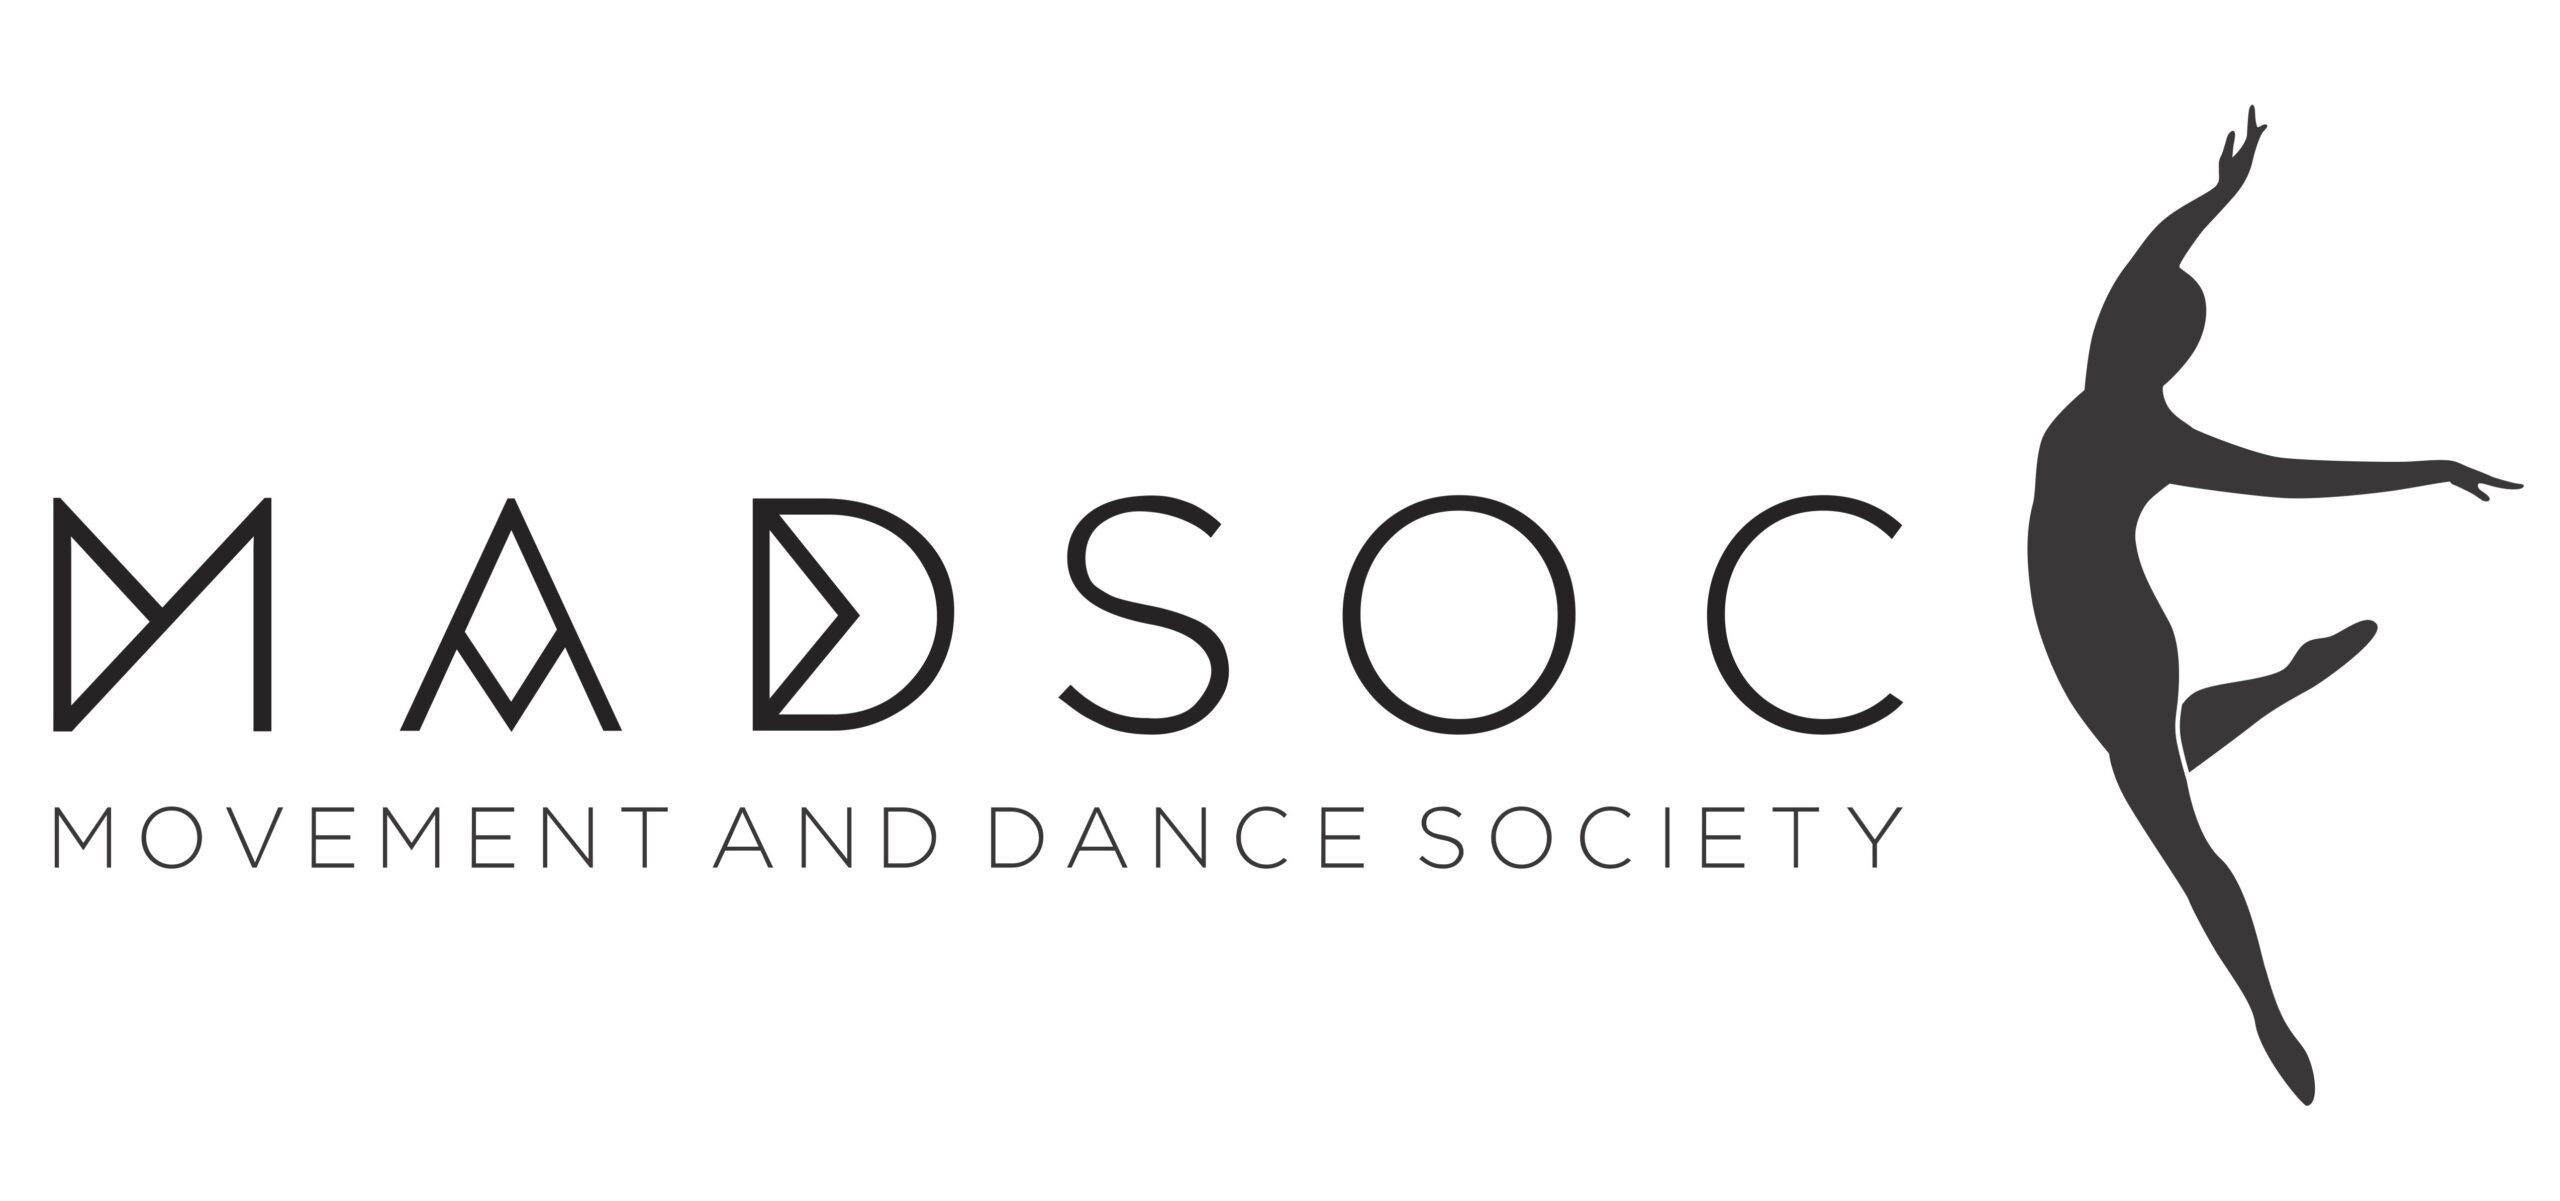 Movement and Dance Society